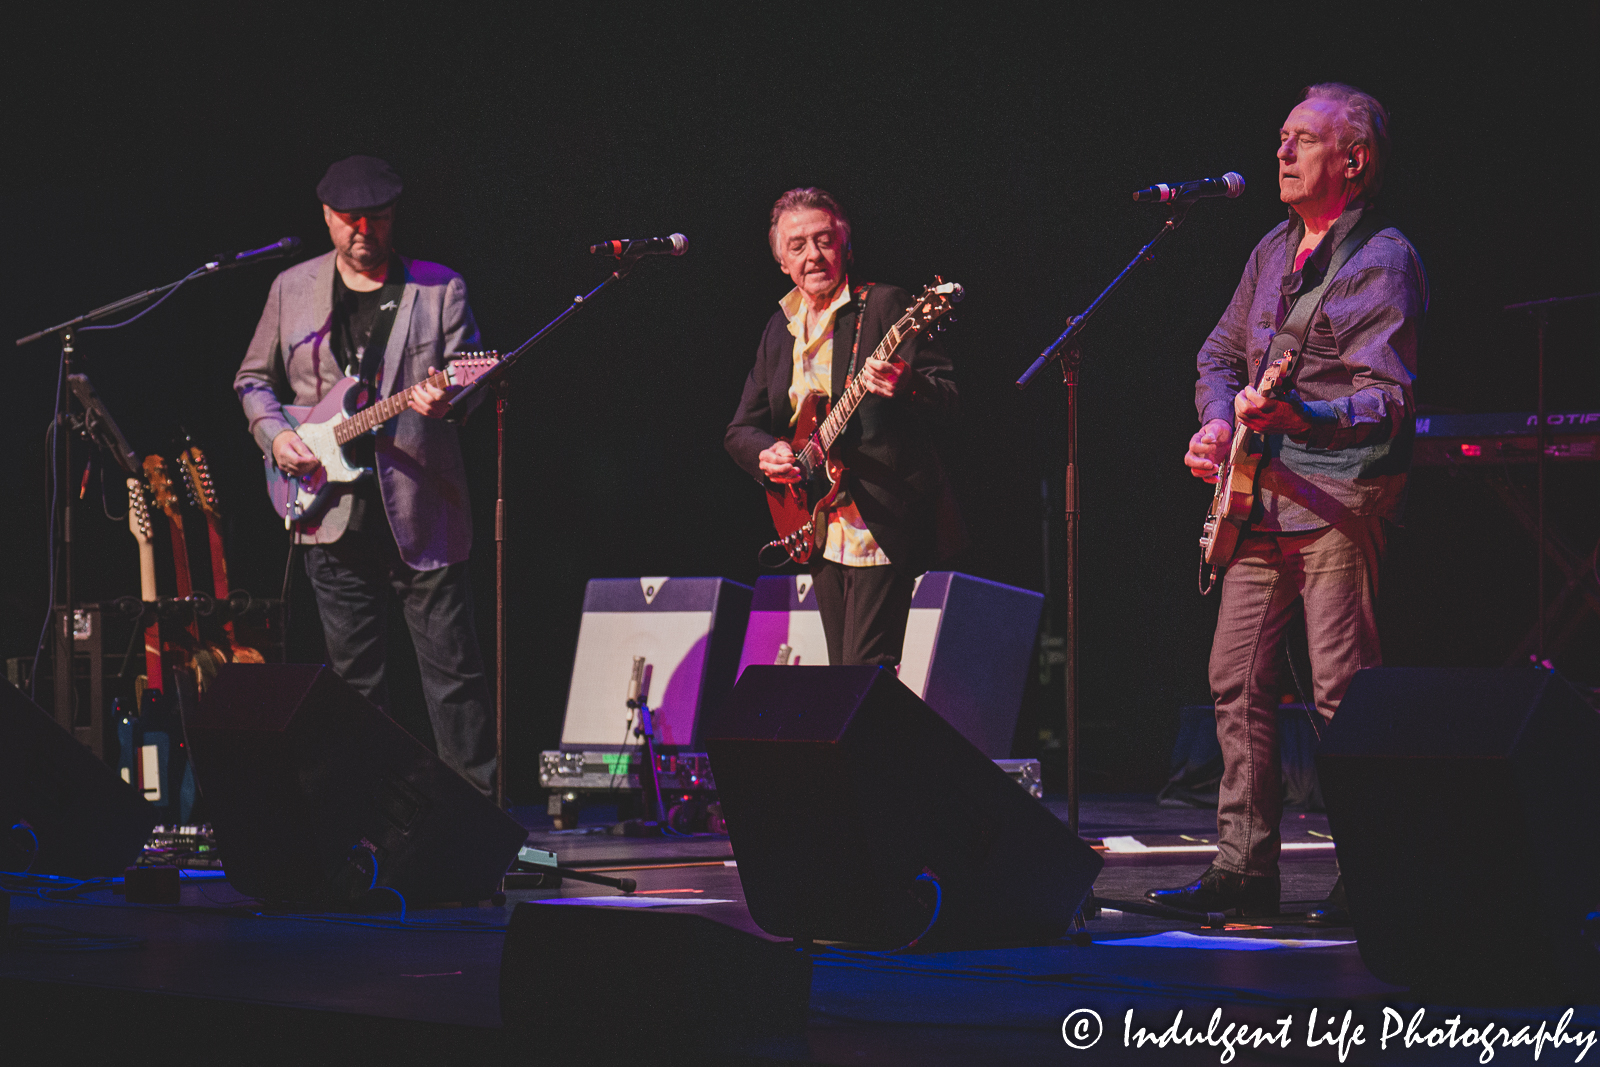 Denny Laine of The Moody Blues and Wings with Joey Molland of Badfinger and Christopher Cross performing live at Kauffman Center for the Performing Arts on March 27, 2022.